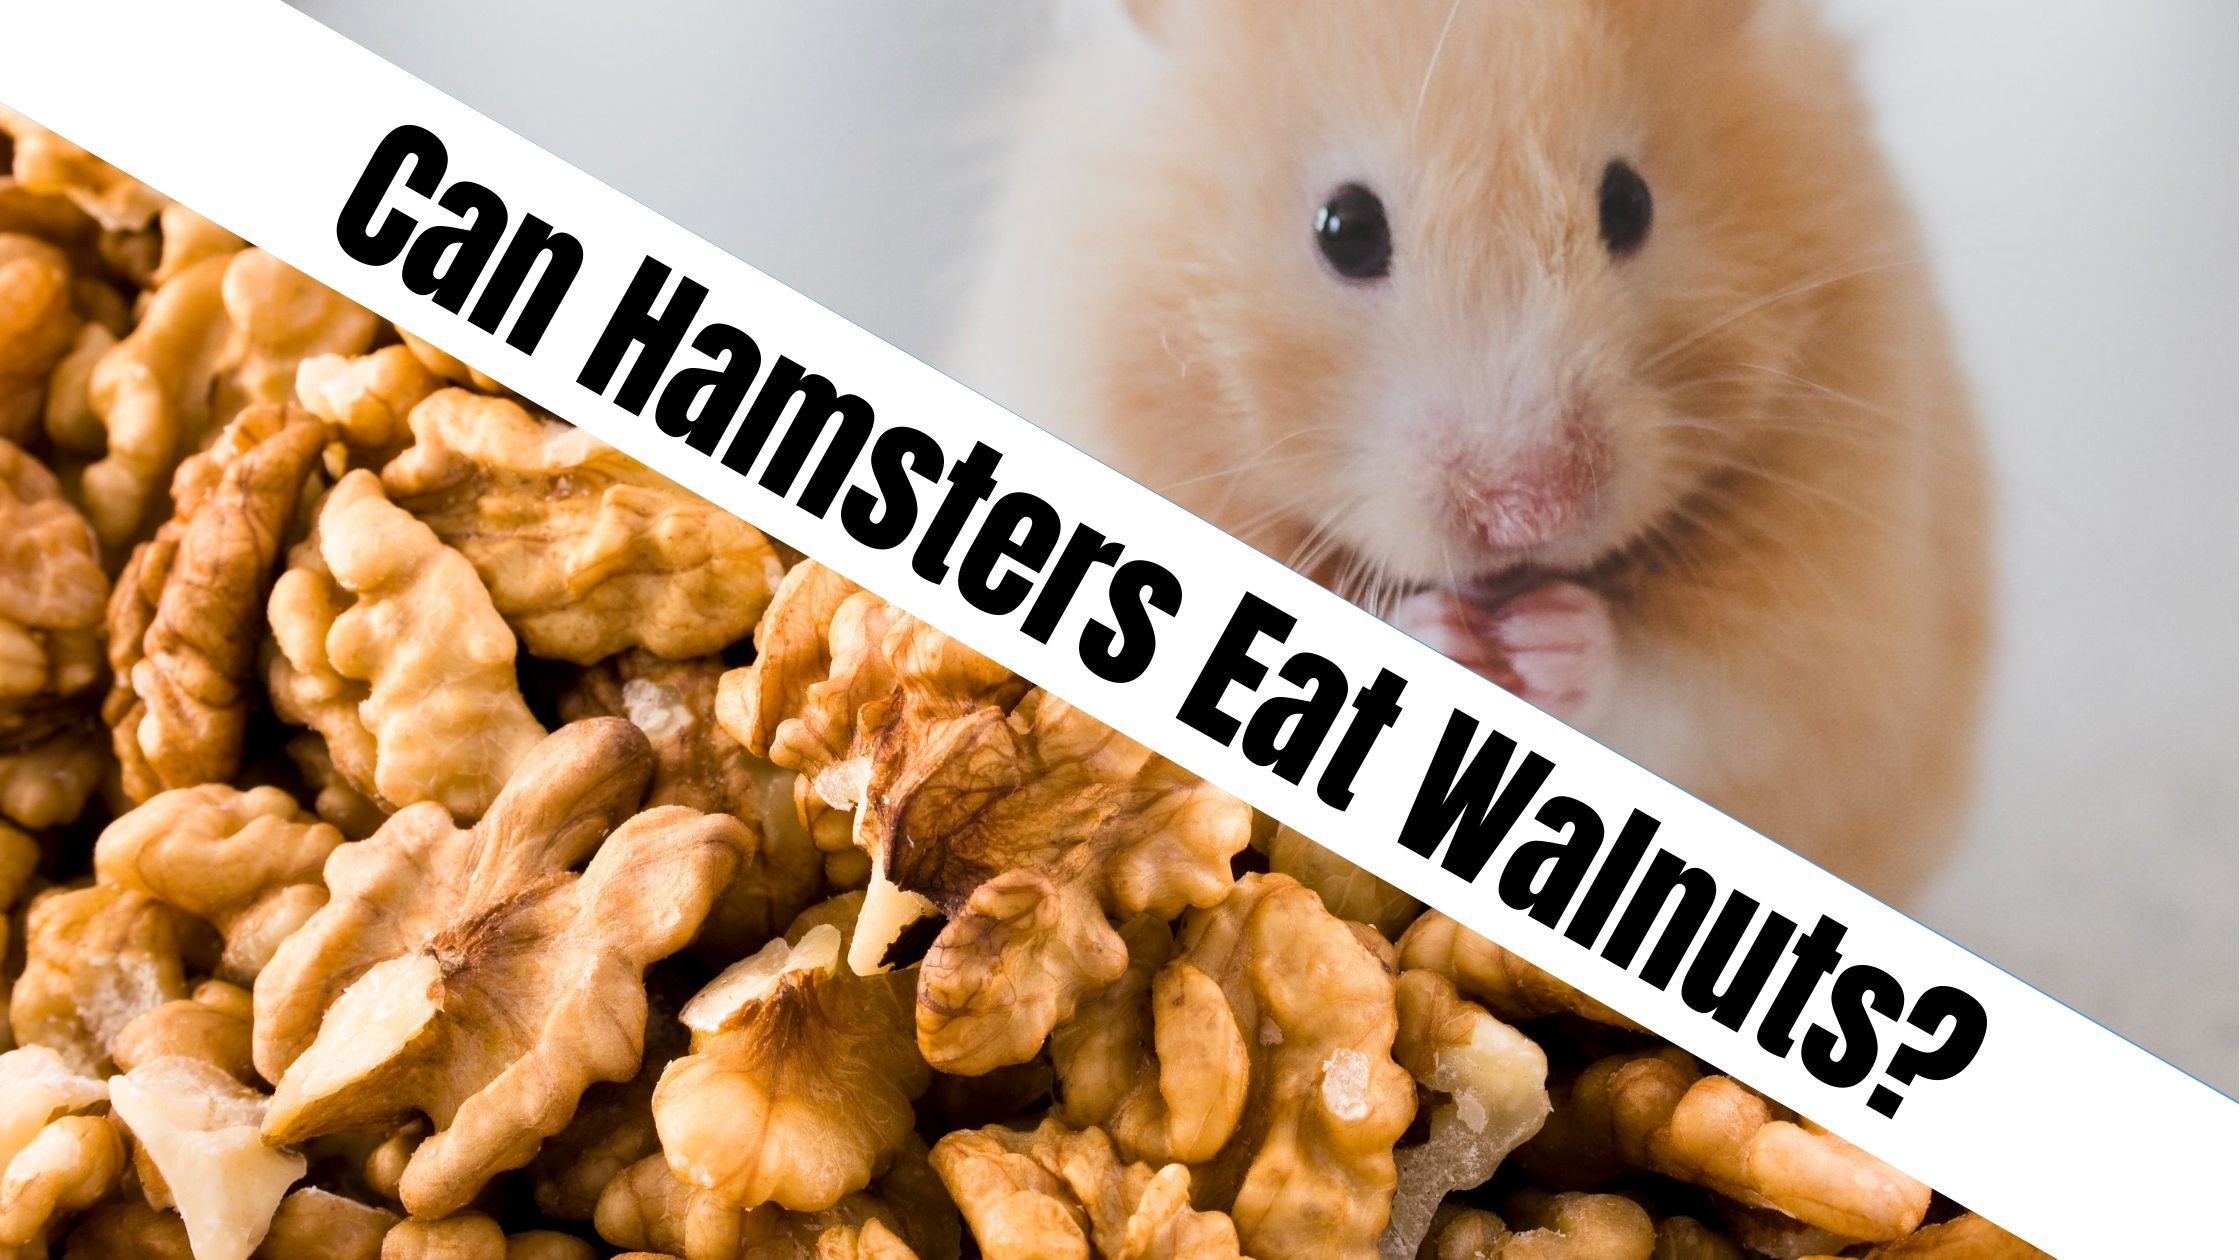 Can Hamsters Eat Walnuts?